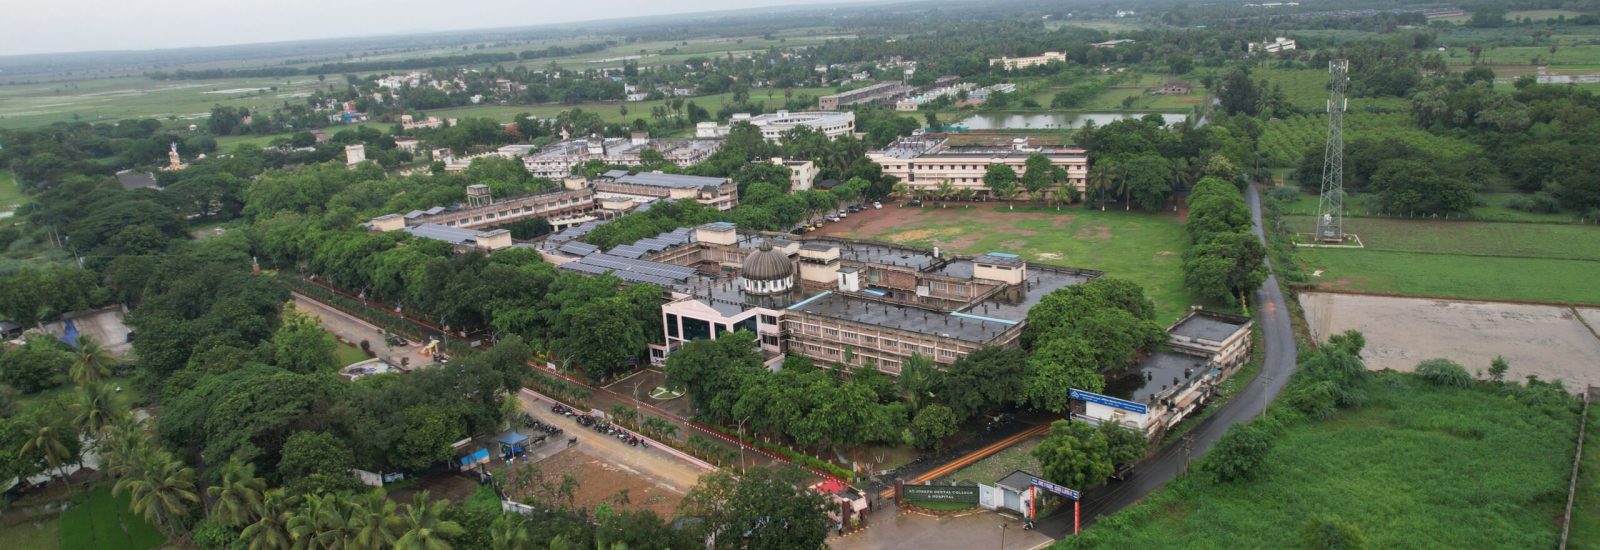 Aerial view of  campus